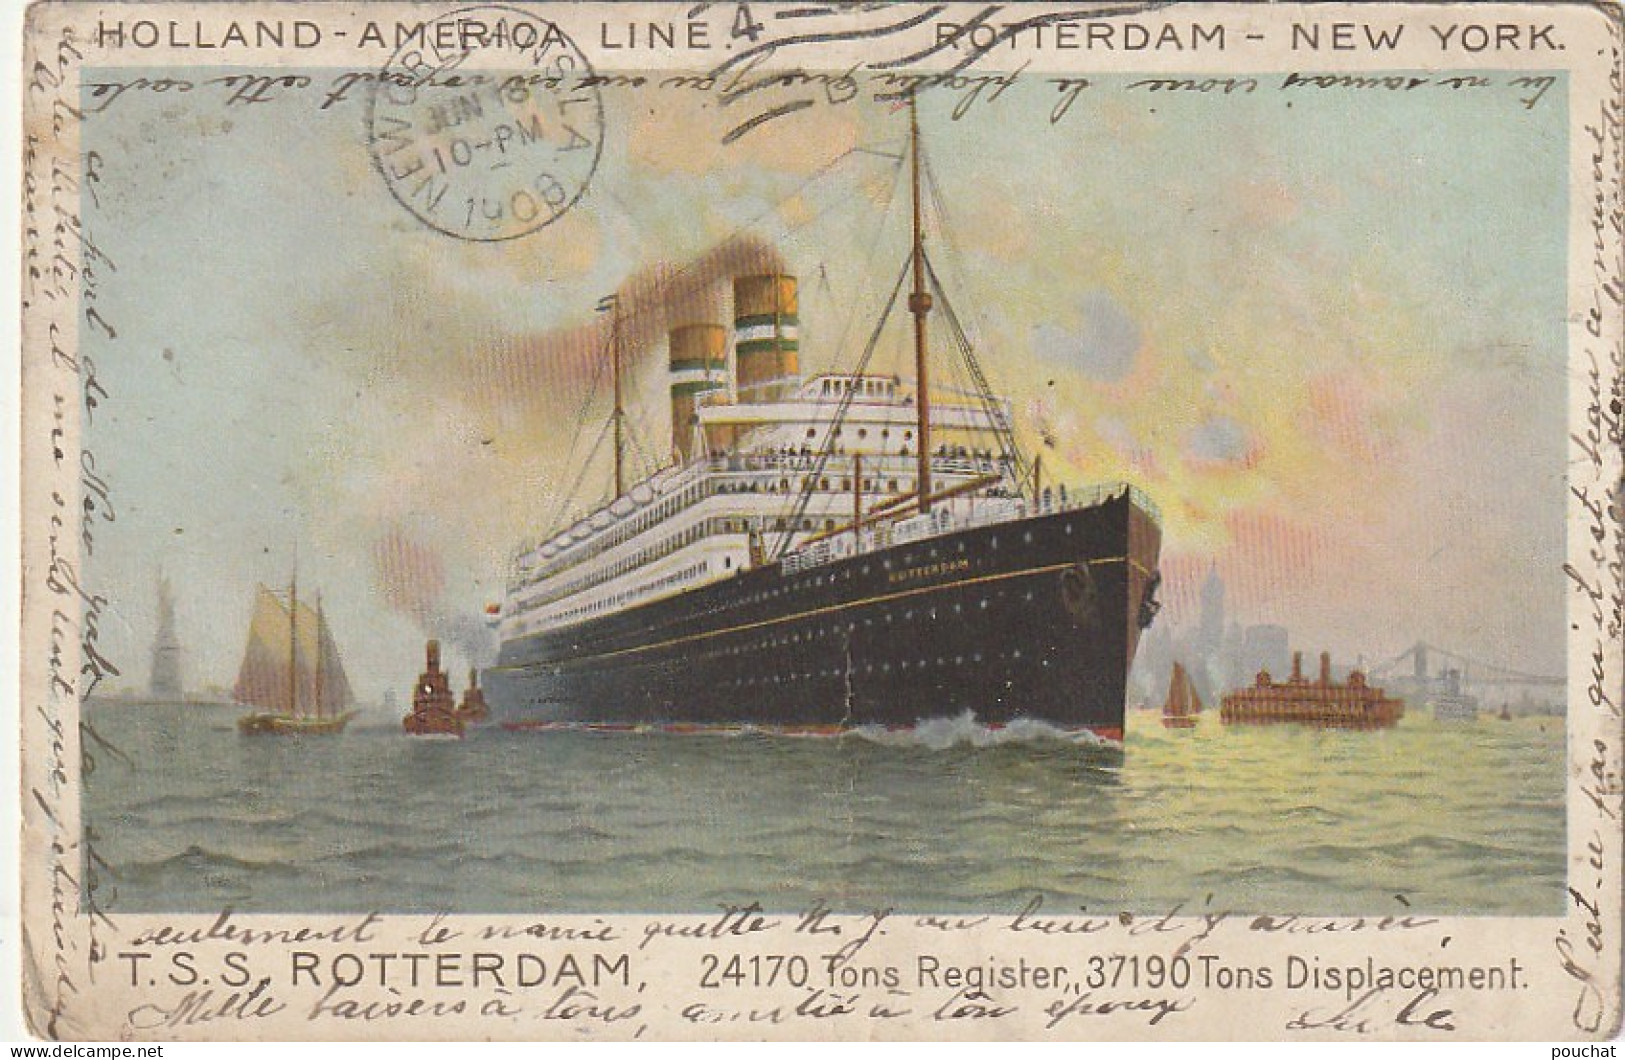 ZY 138- T. S. S. ROTTERDAM  - HOLLAND AMERICA LINE - ROTTERDAM NEW YORK - PAQUEBOT - 2 SCANS - Steamers